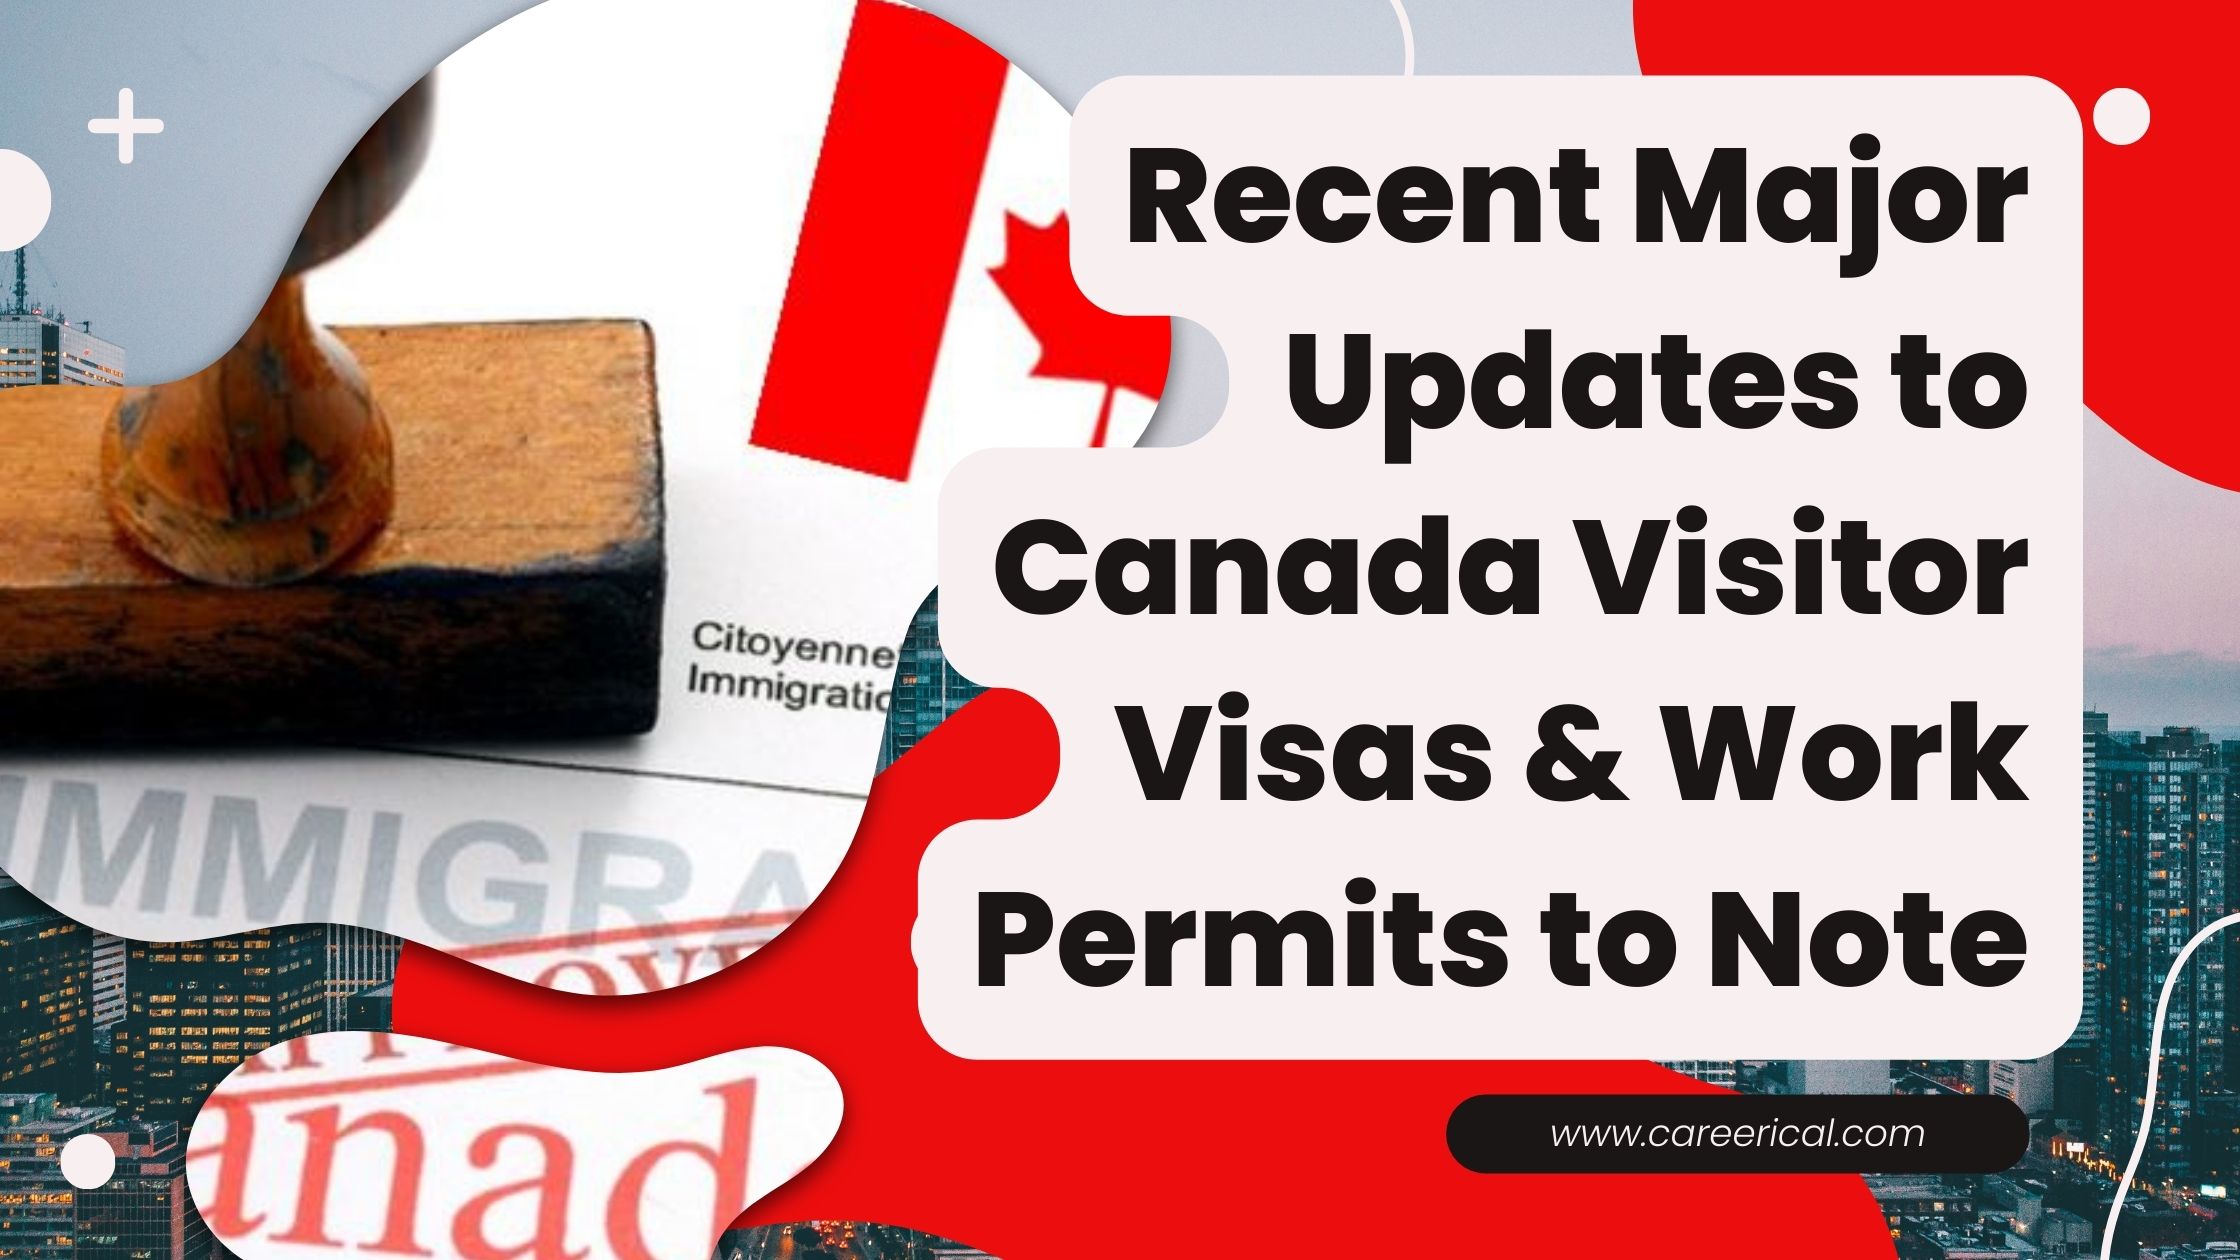 Recent Major Updates to Canada Visitor Visas & Work Permits to Note